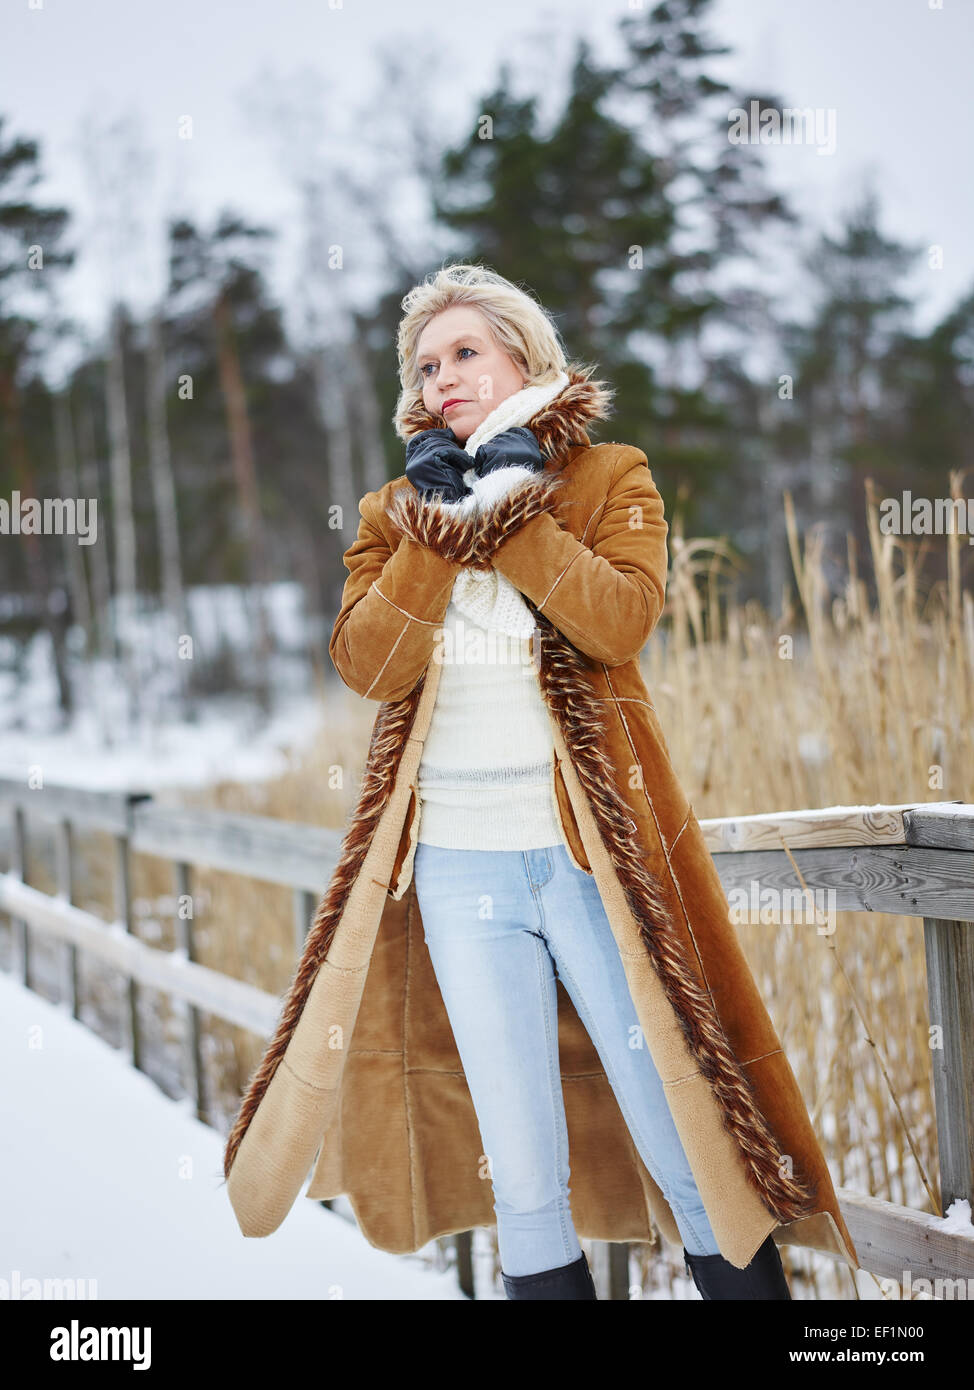 https://c8.alamy.com/comp/EF1N00/fashionable-mature-adult-woman-wearing-winter-clothes-and-she-standing-EF1N00.jpg